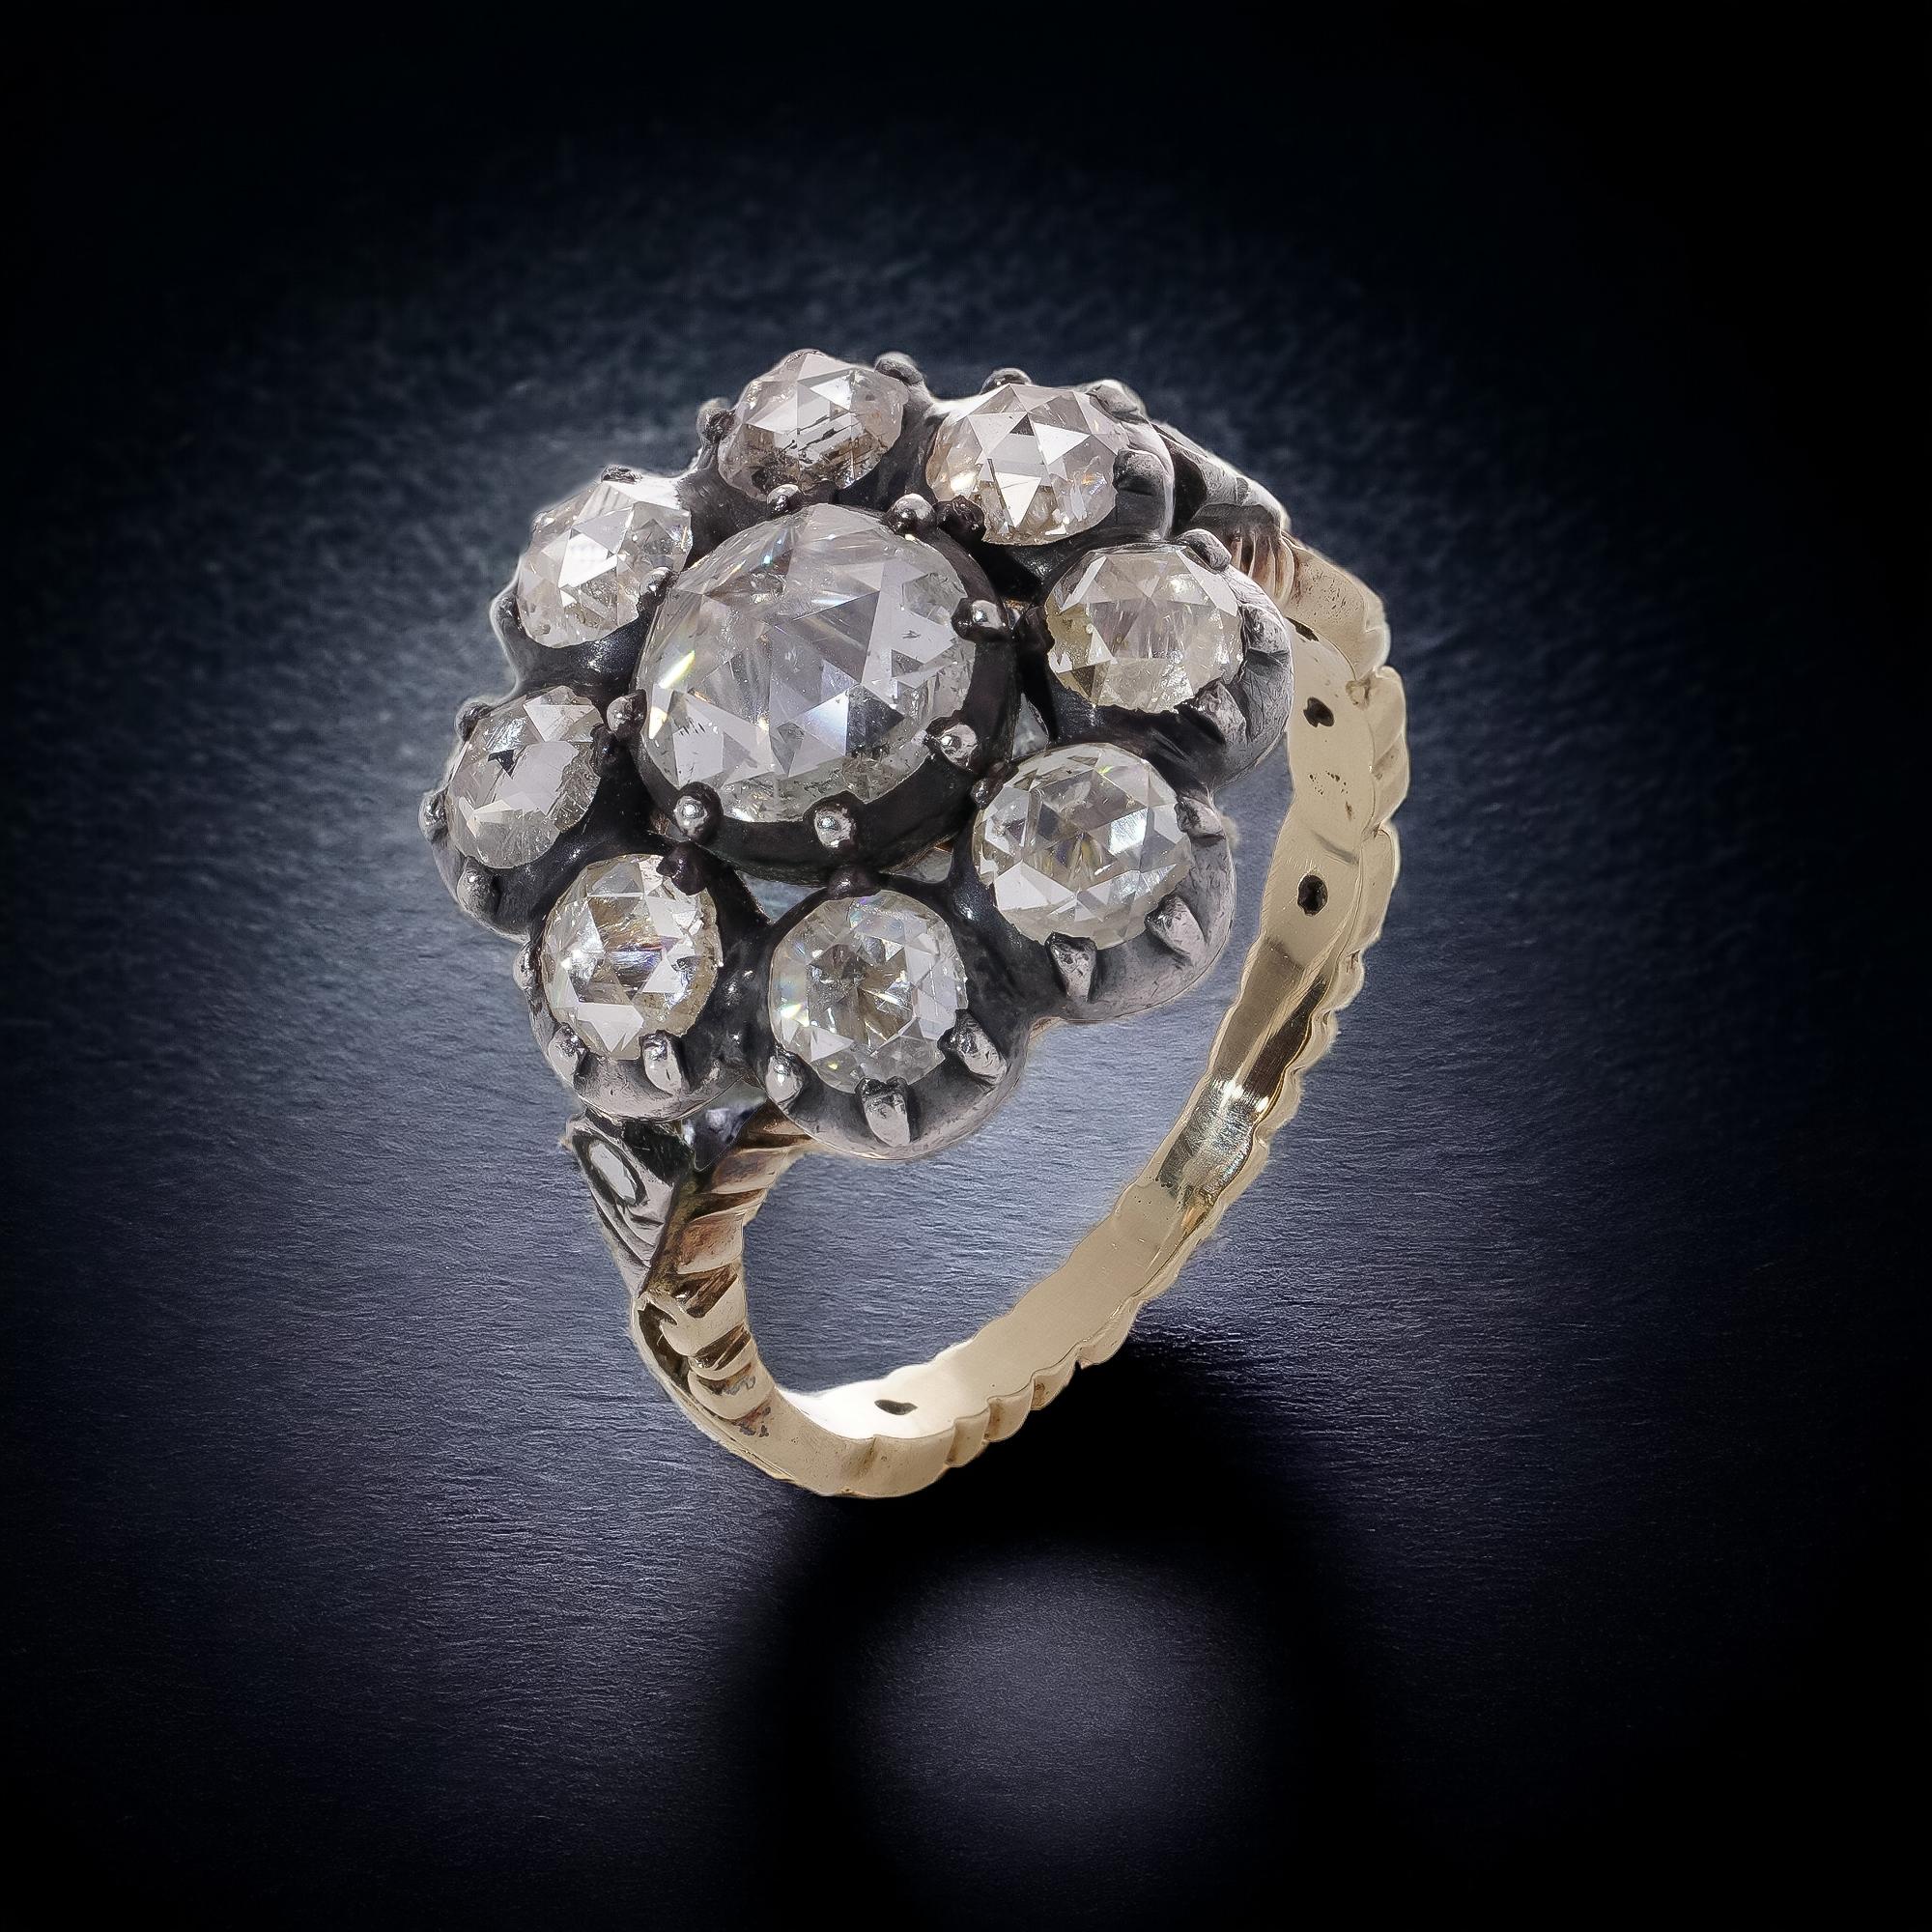 Georgian style 14kt. yellow gold and silver 3.12 carats of rose-cut diamonds daisy cluster ring. 
The back of the stone has been expertly foiled to optimize the diamond's brilliance.
X - Rauy tested positive for 14kt. gold and silver. 
Made in